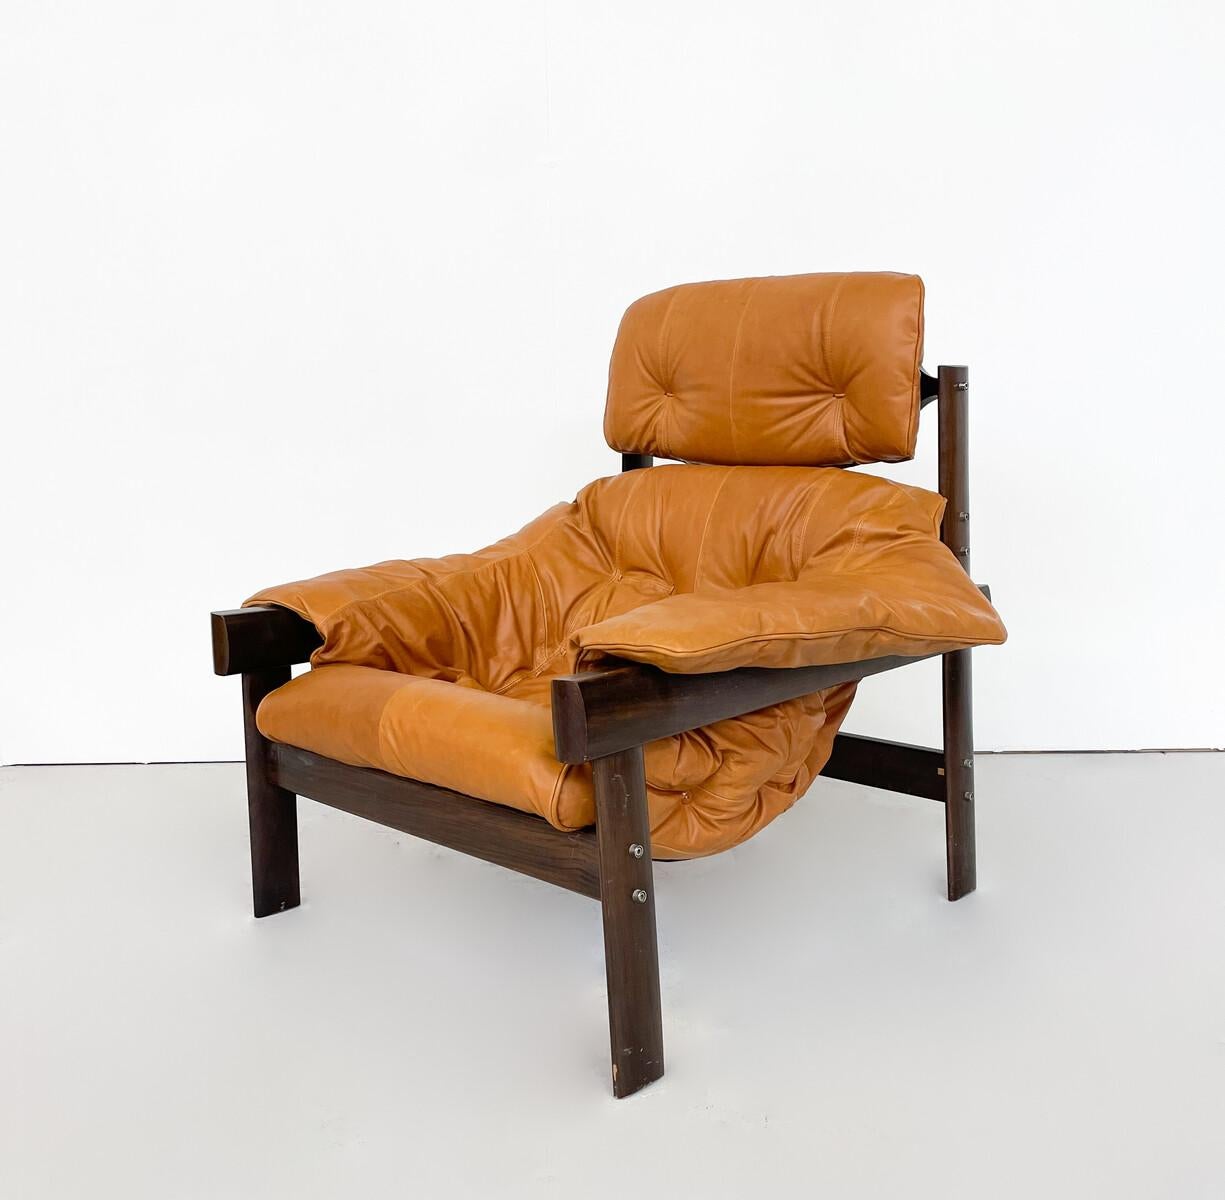 Mid-20th Century Mid-Century Modern Armchair by Percival Lafer for Lafer MP, Brazil, 1960s For Sale